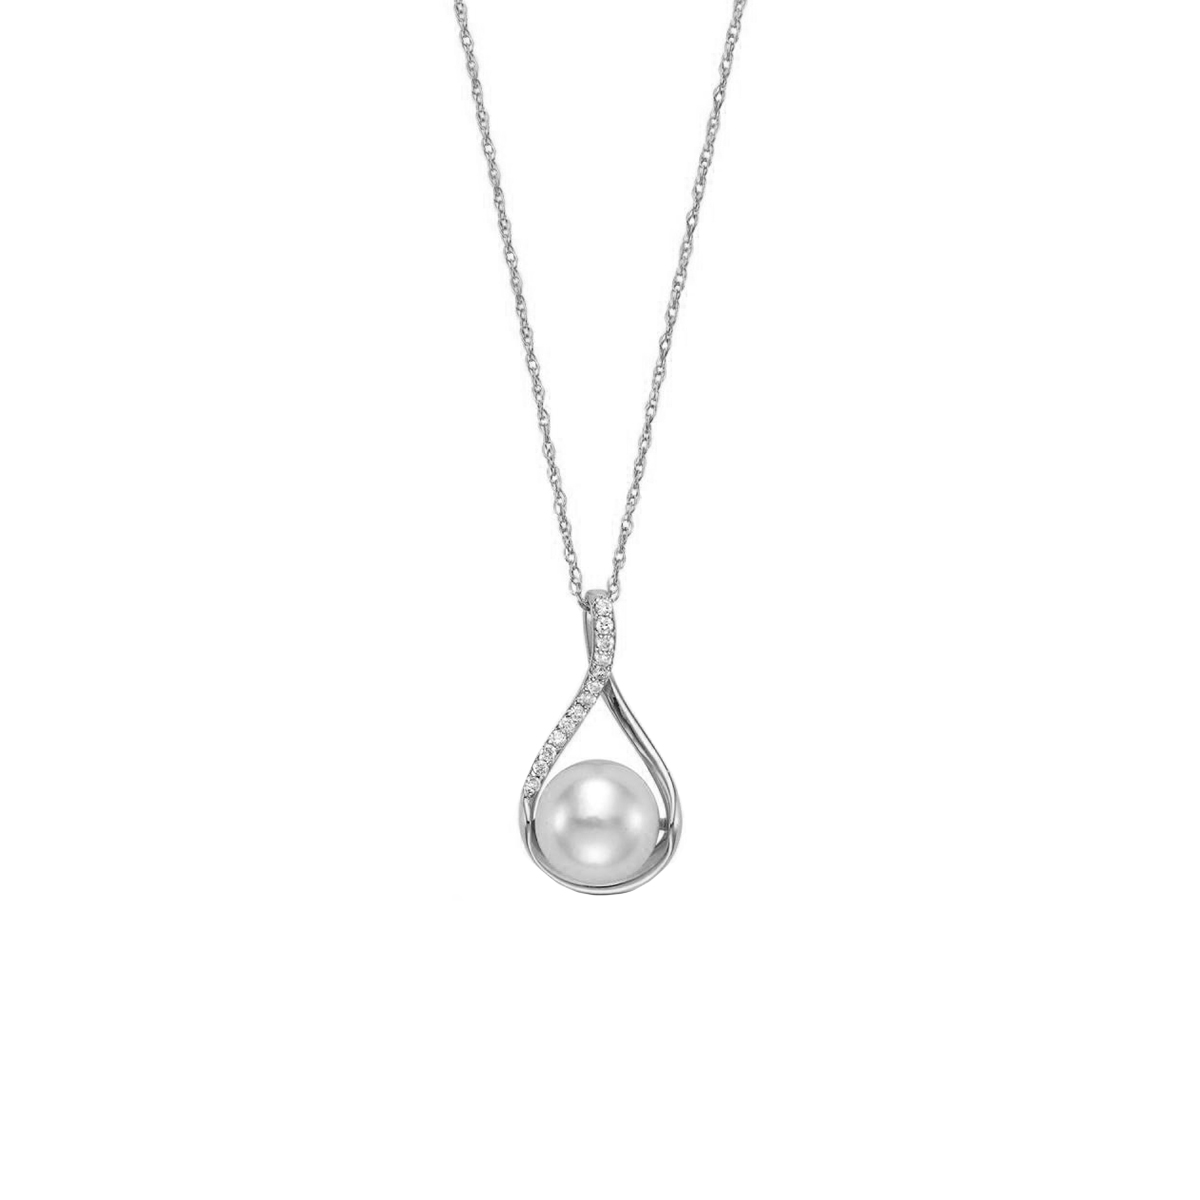 14K White Gold Cultured Pearl and Diamond Pendant with Chain